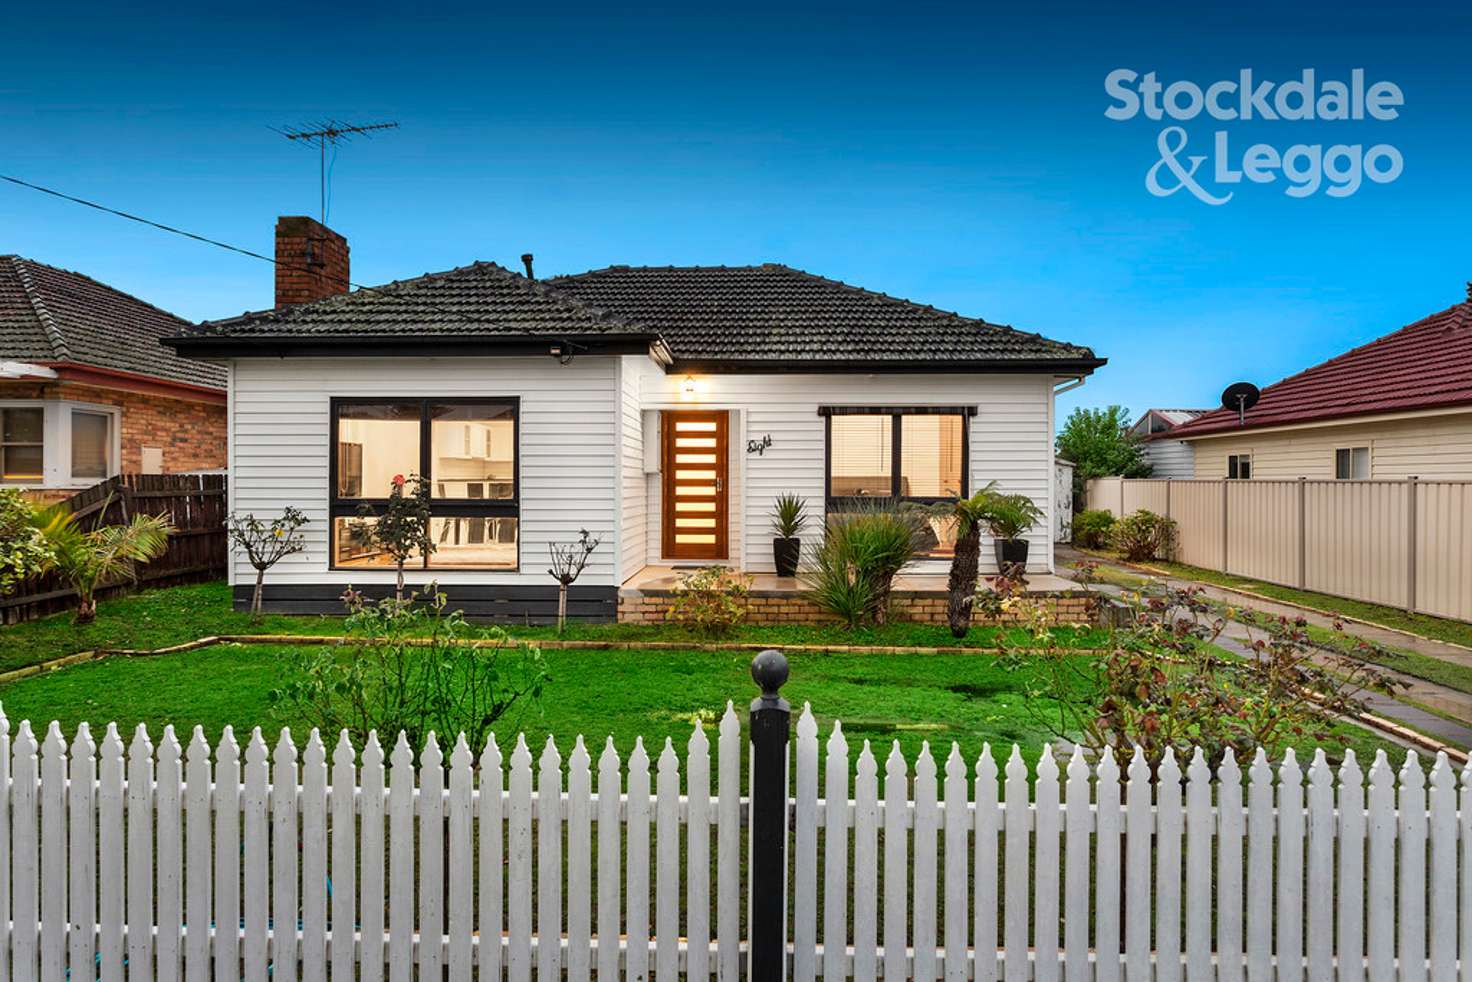 Main view of Homely house listing, 8 Ila Street, Glenroy VIC 3046